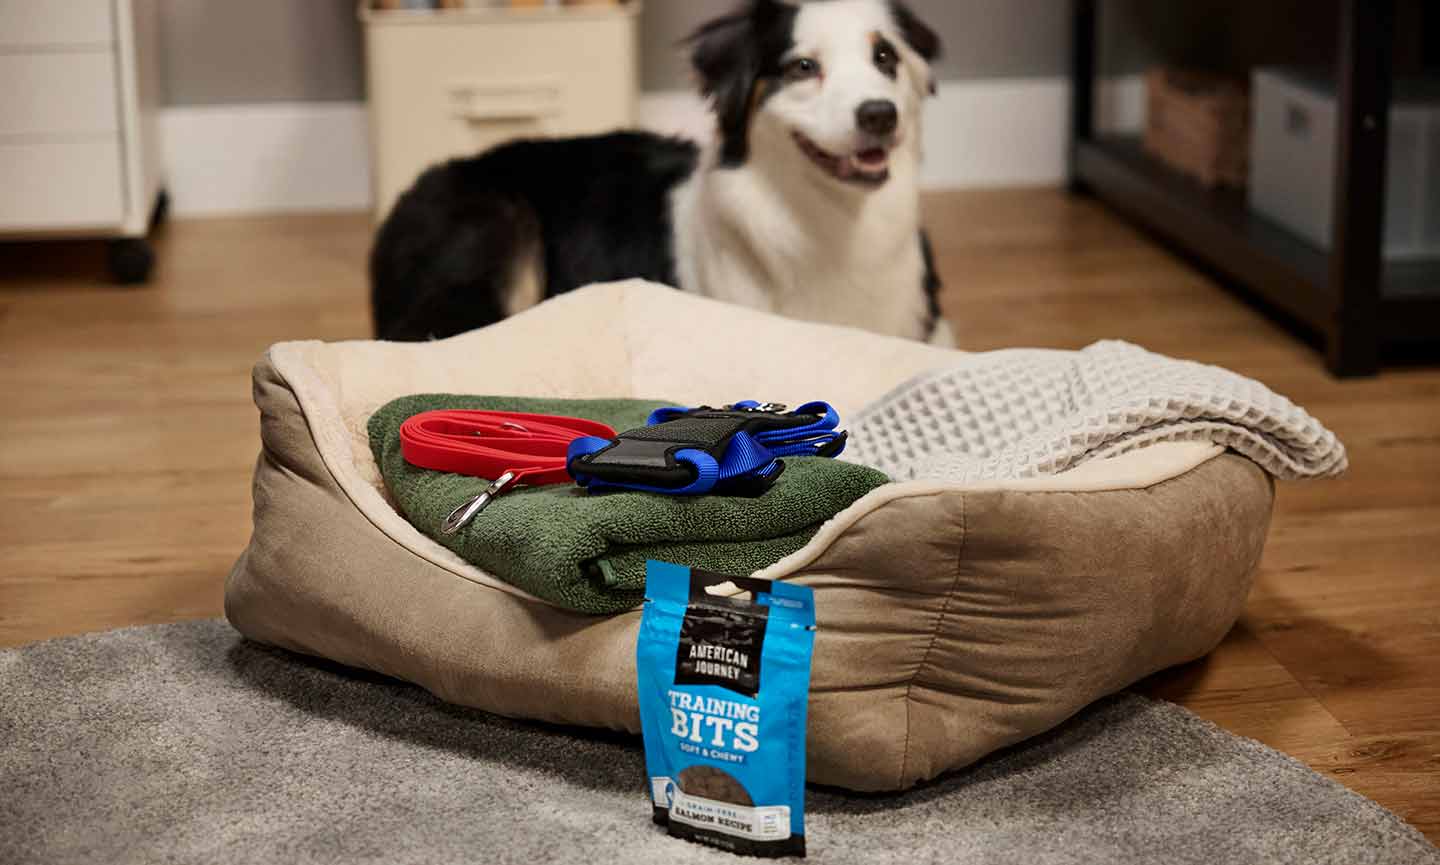 A dog sitting behind a display of training products, including dog treats, a leash and harness, a dog bed and towel